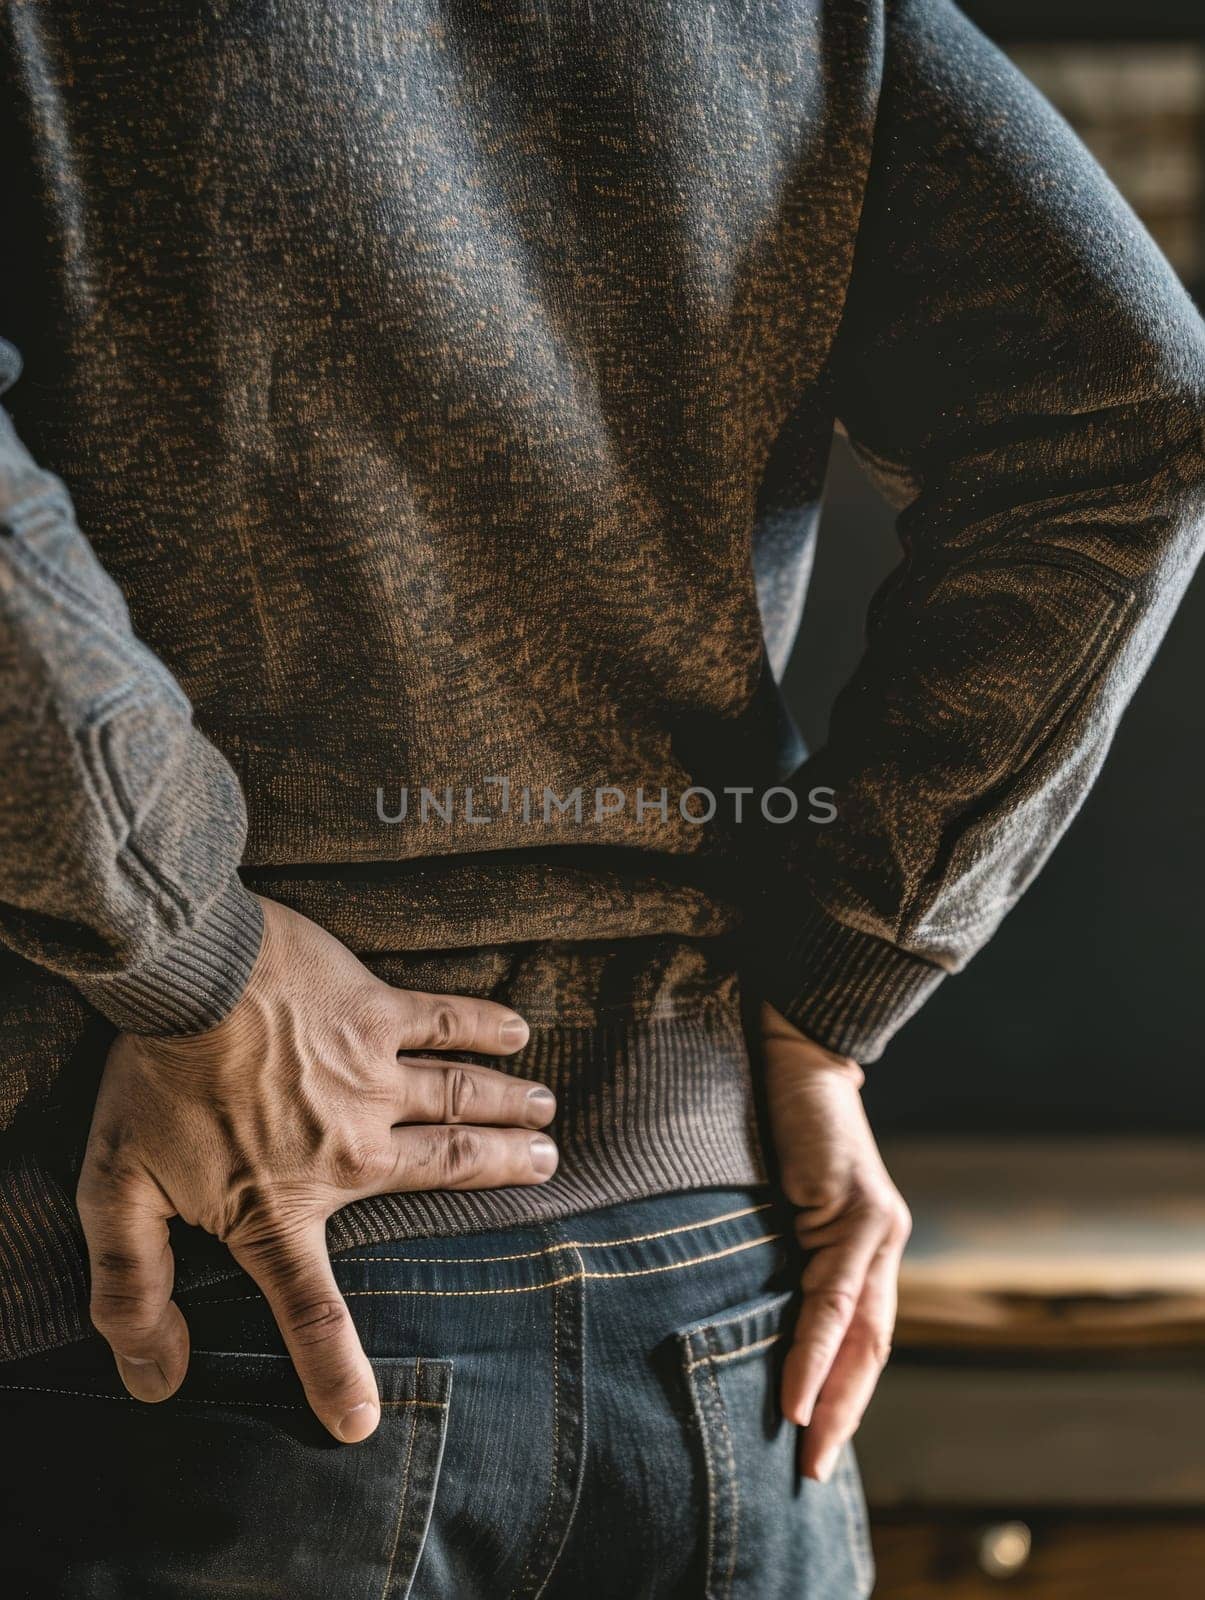 A person discreetly holds their back in pain, dressed casually in a textured sweater and trousers, highlighting everyday discomfort. by sfinks